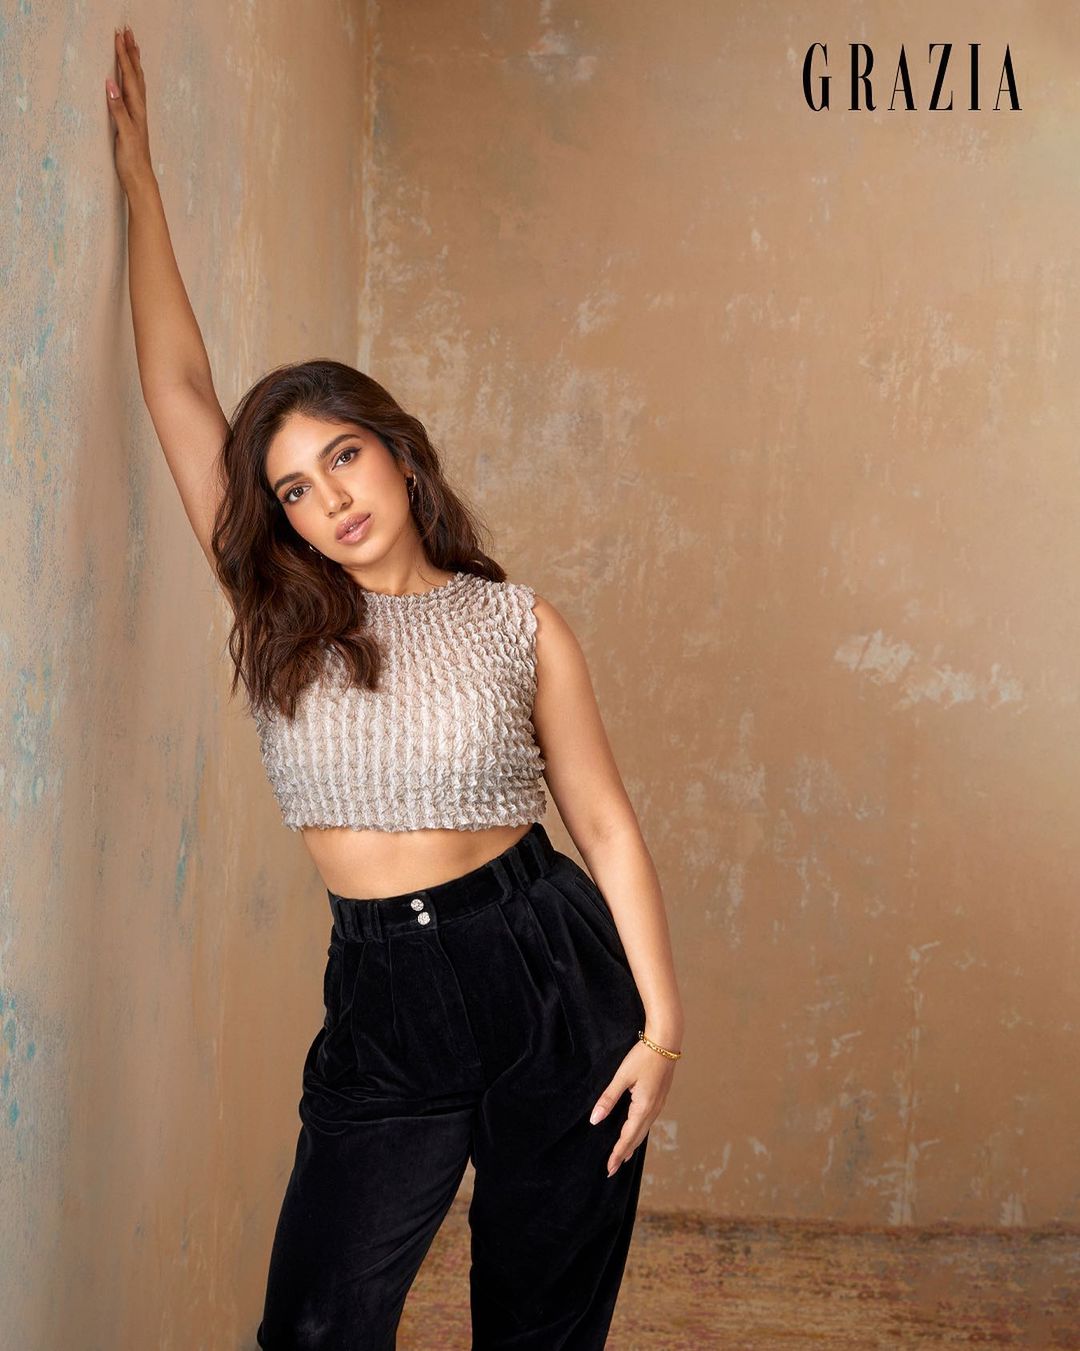 Bhumi Pednekar strikes a pose in the crop top and trousers.